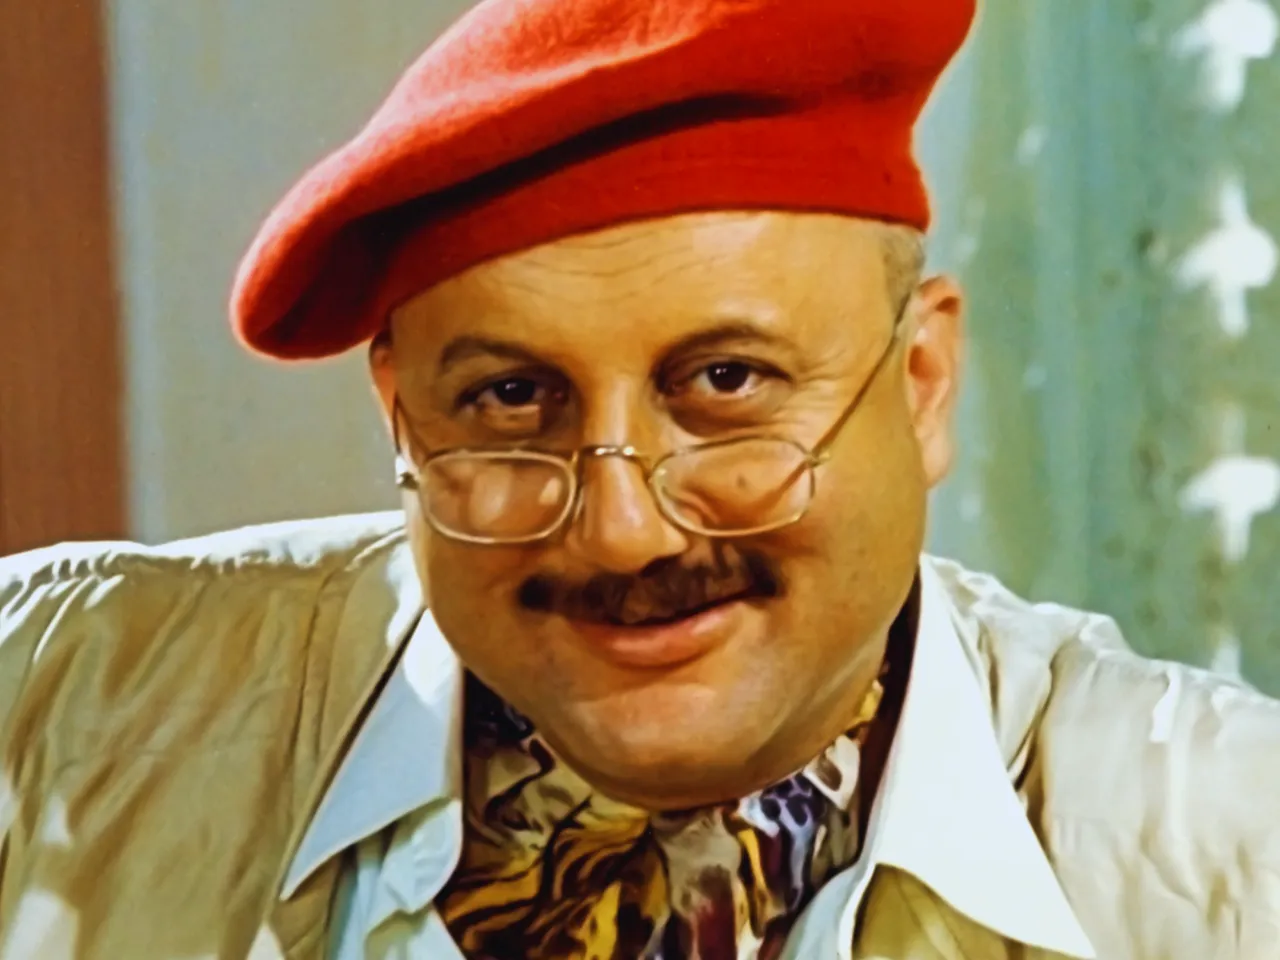 Anupam Kher: The father figure we all love!